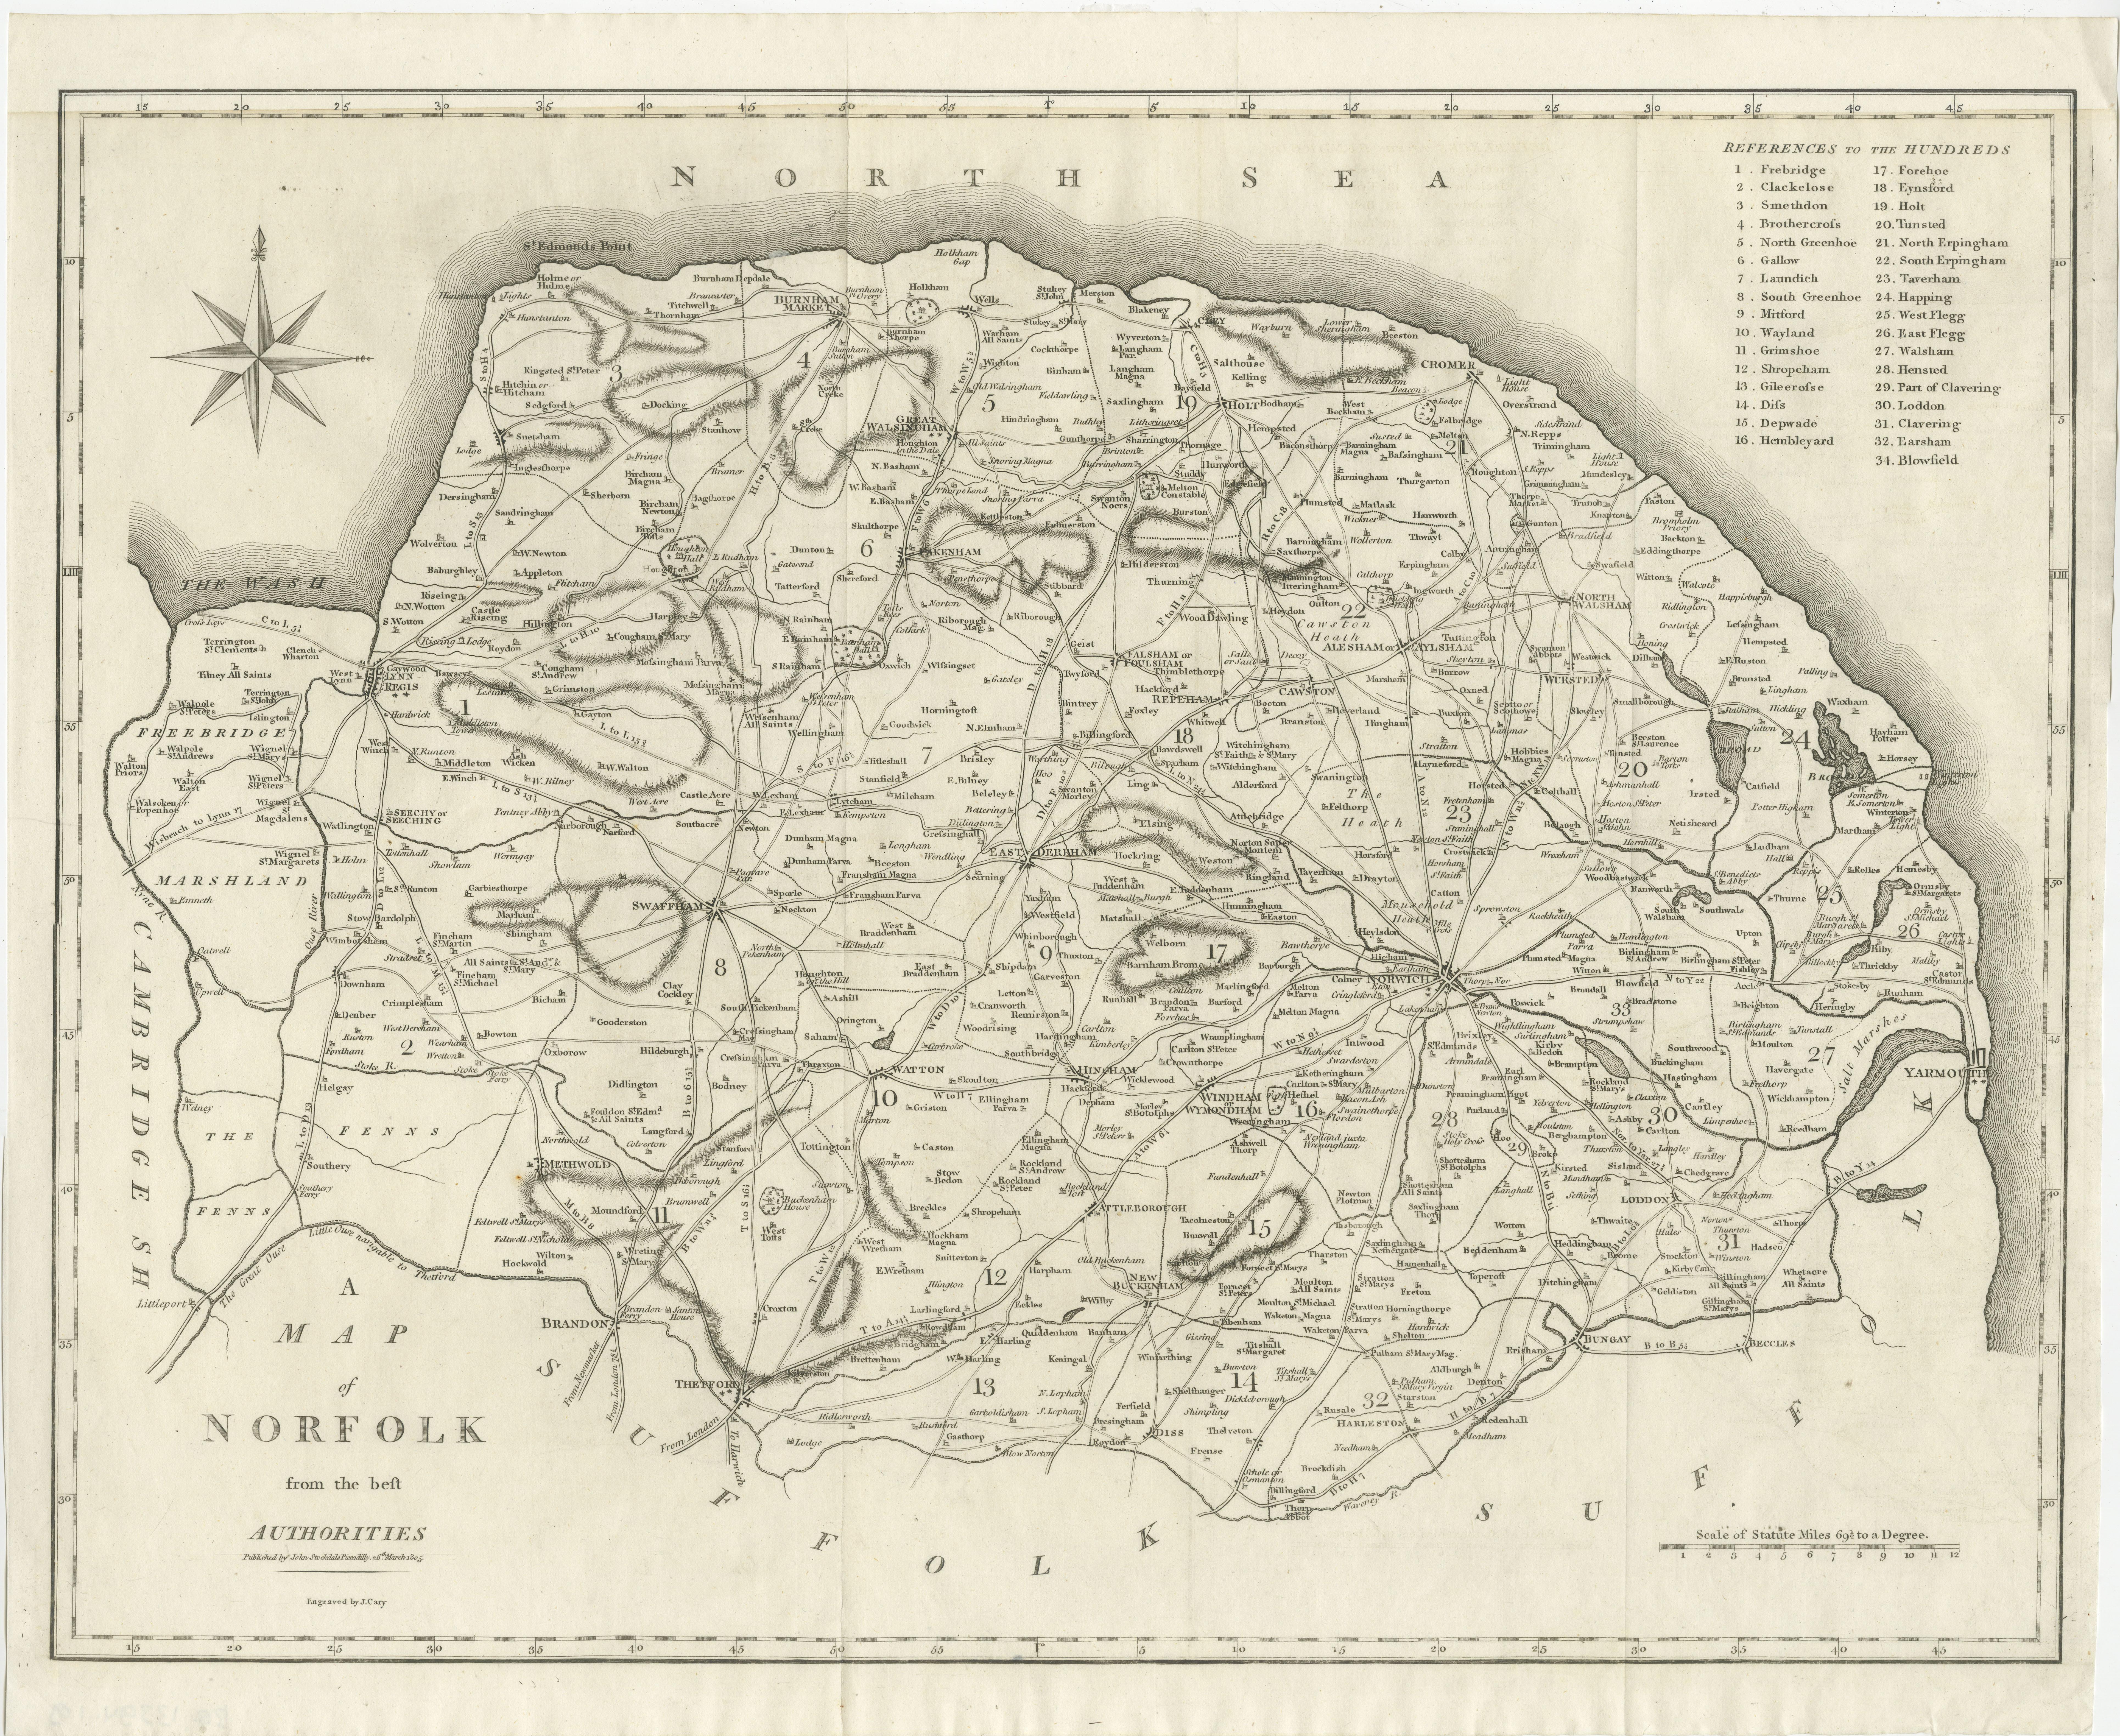 Antique map titled 'A Map of Norfolk from the best Authorities'. Original old county map of Norfolk, England. Engraved by John Cary. Originates from 'New British Atlas' by John Stockdale, published 1805. 

John Cary (1755-1835) was a British